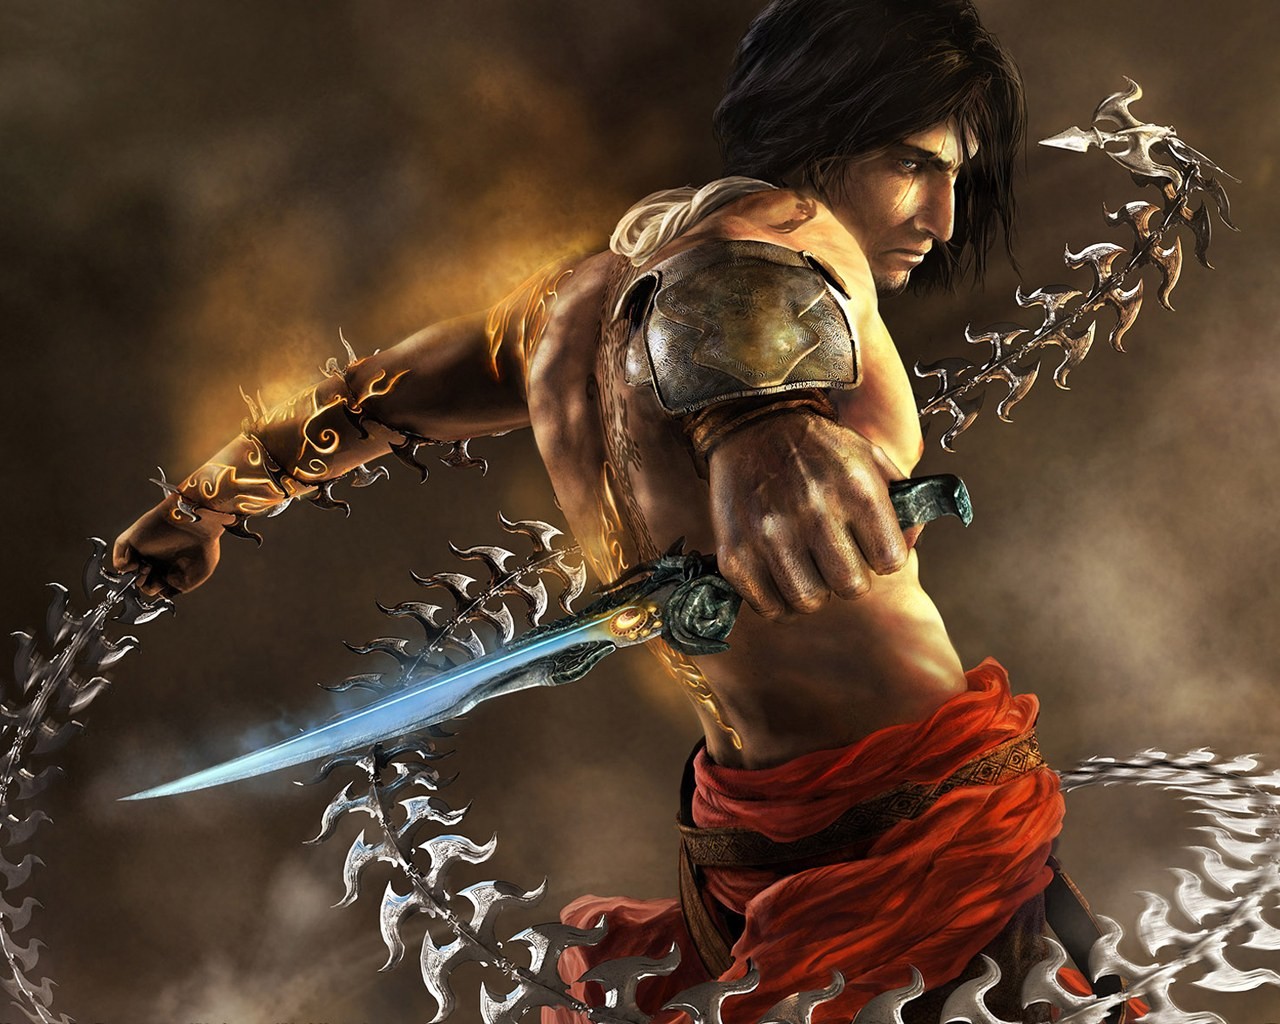 Prince of Persia full range of wallpapers #20 - 1280x1024